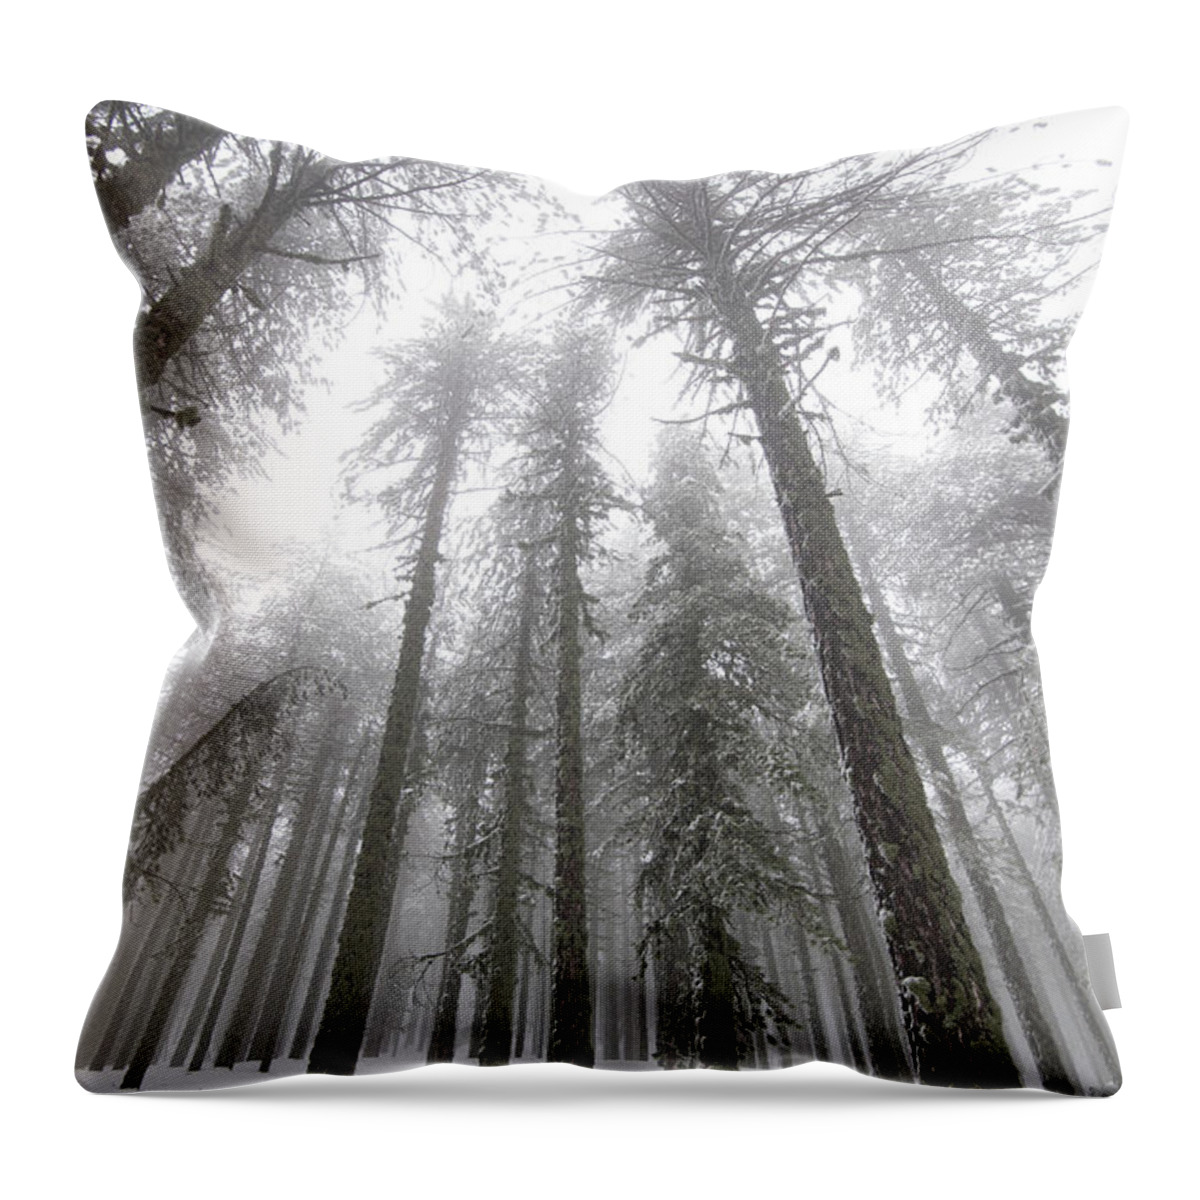 Winter Landscape Throw Pillow featuring the photograph Winter forest landscape with mountain covered in snow by Michalakis Ppalis